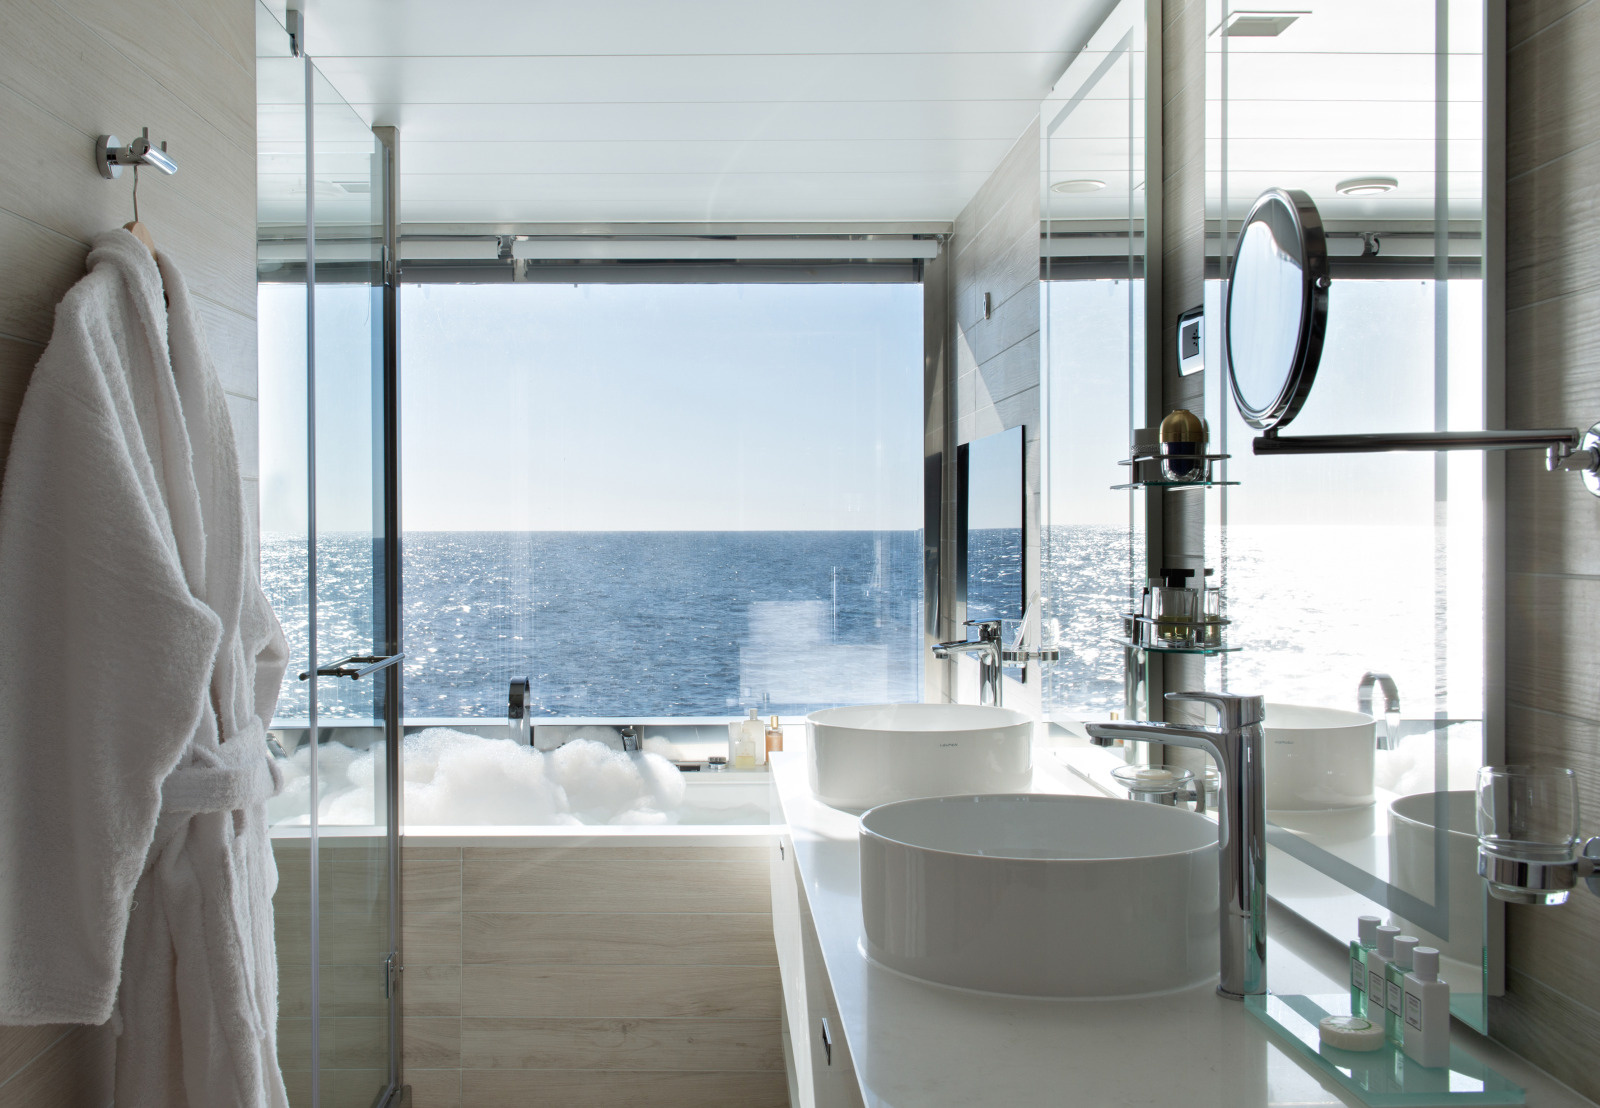 A private Jacuzzi with a view from the master bathroom